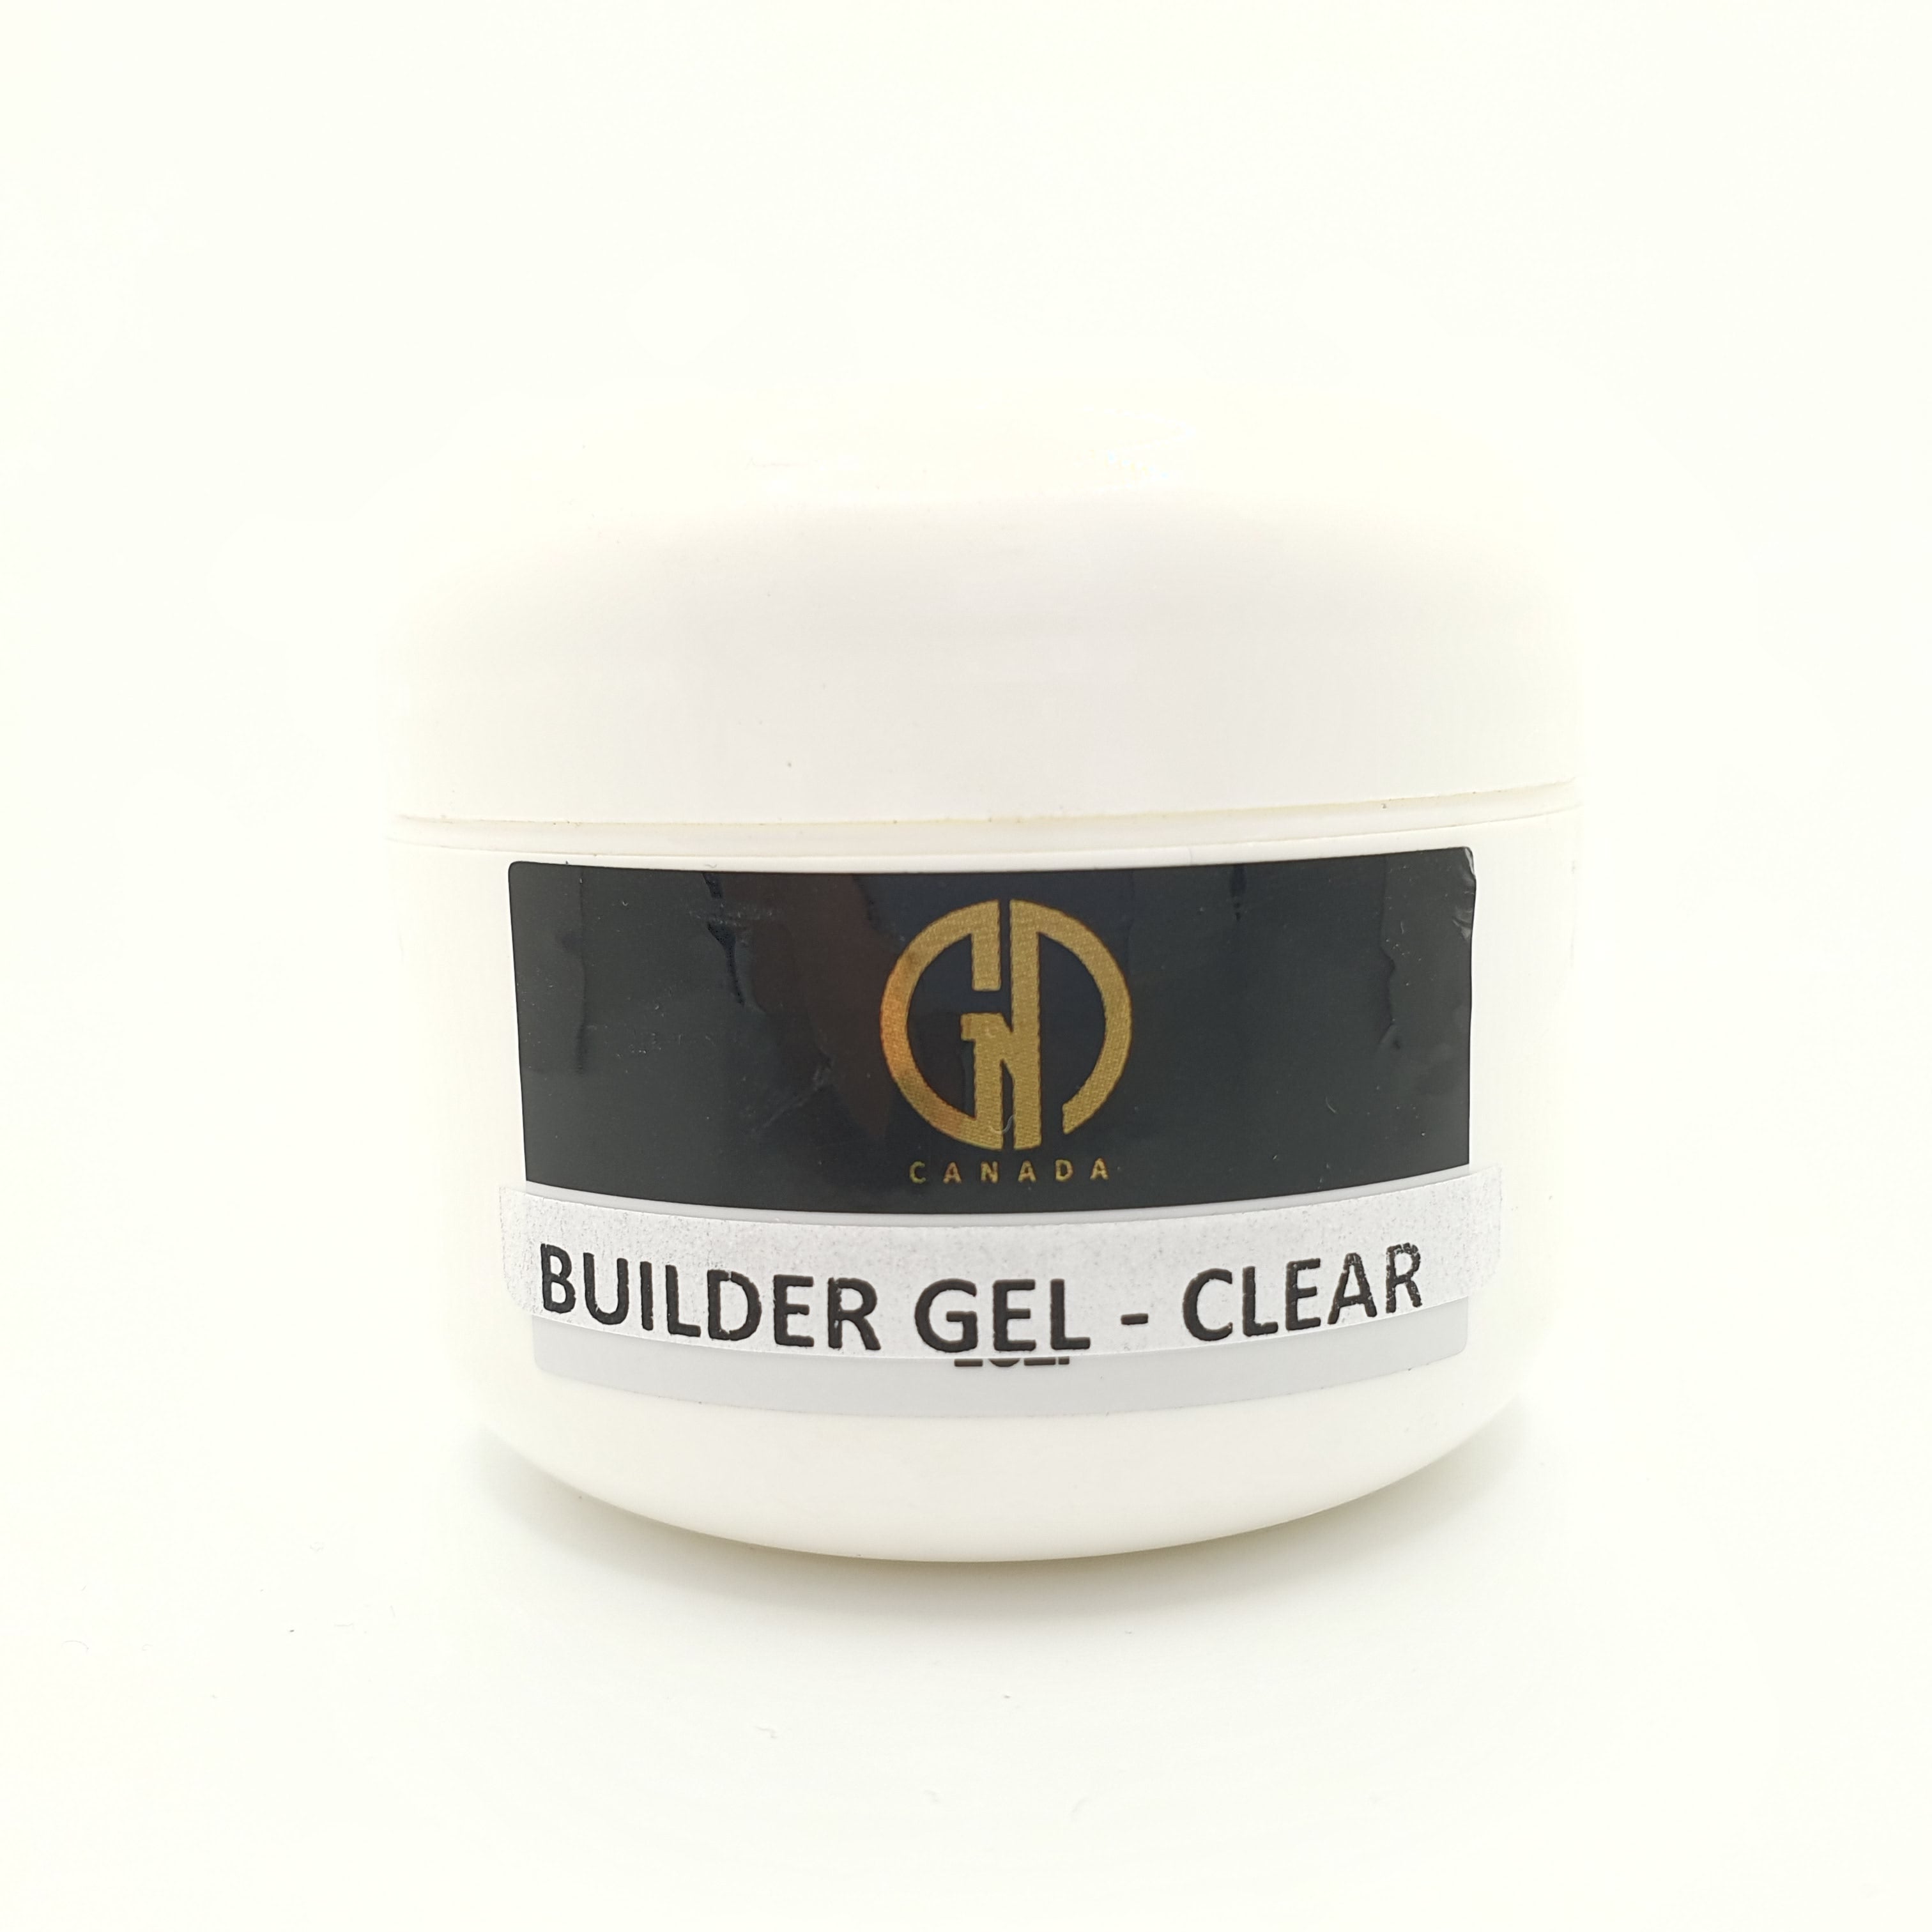 GND BUILDER GEL - CLEAR (WHITE CONTAINER) 1.5OZ